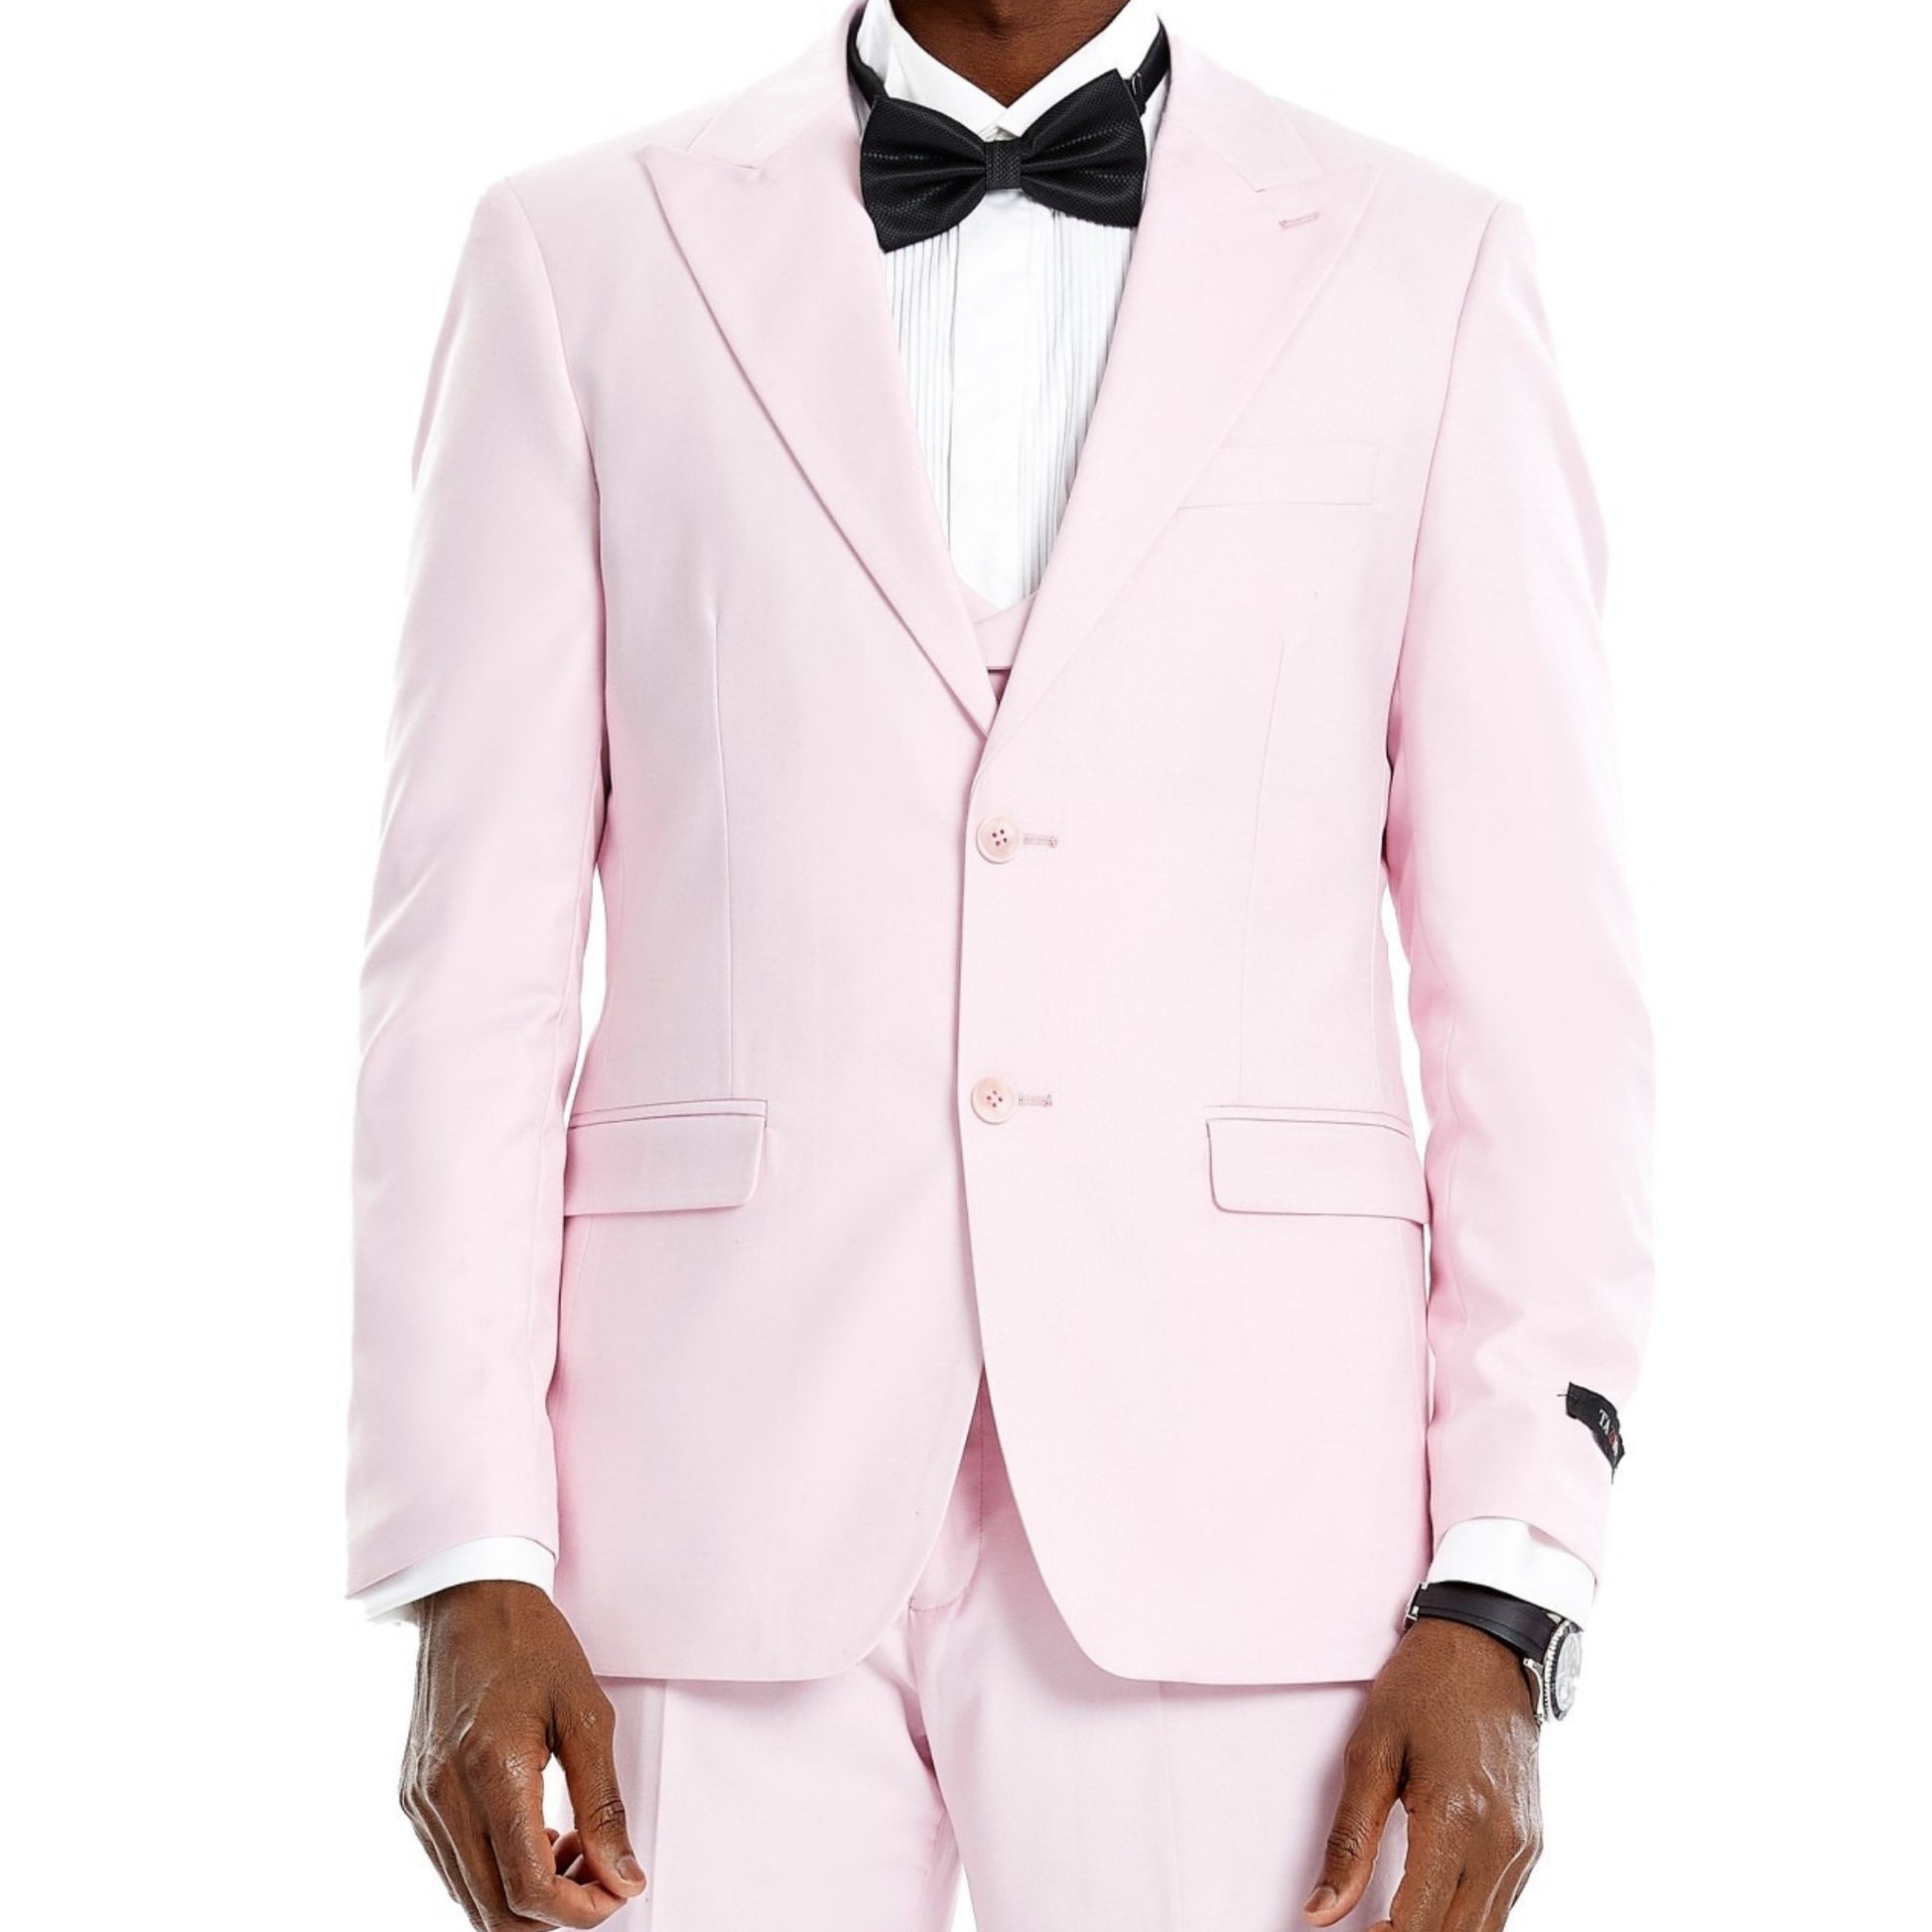 Charming man dressed in a blush pink full suit for prom night.